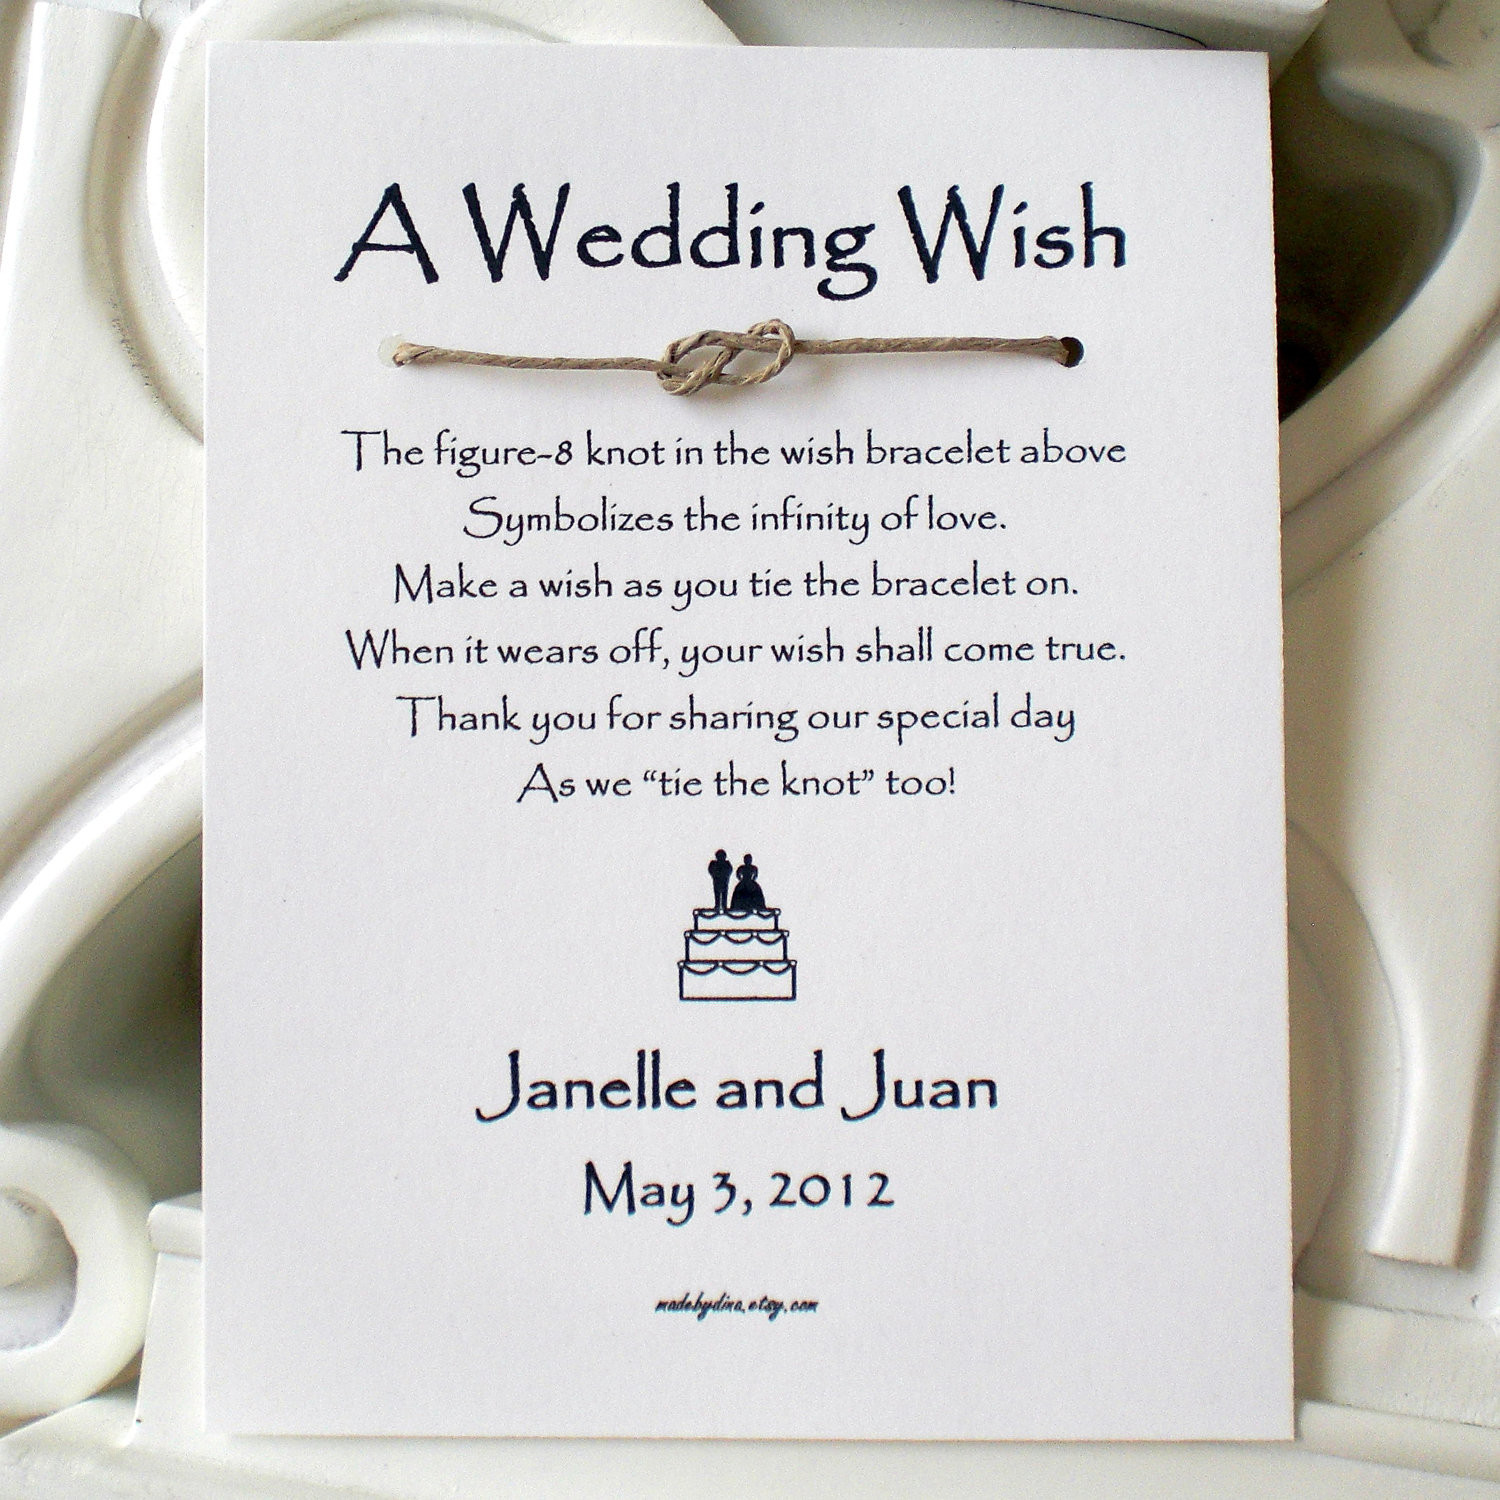 Marriage Invitation Quotes
 Wedding Invitation Sayings And Quotes QuotesGram